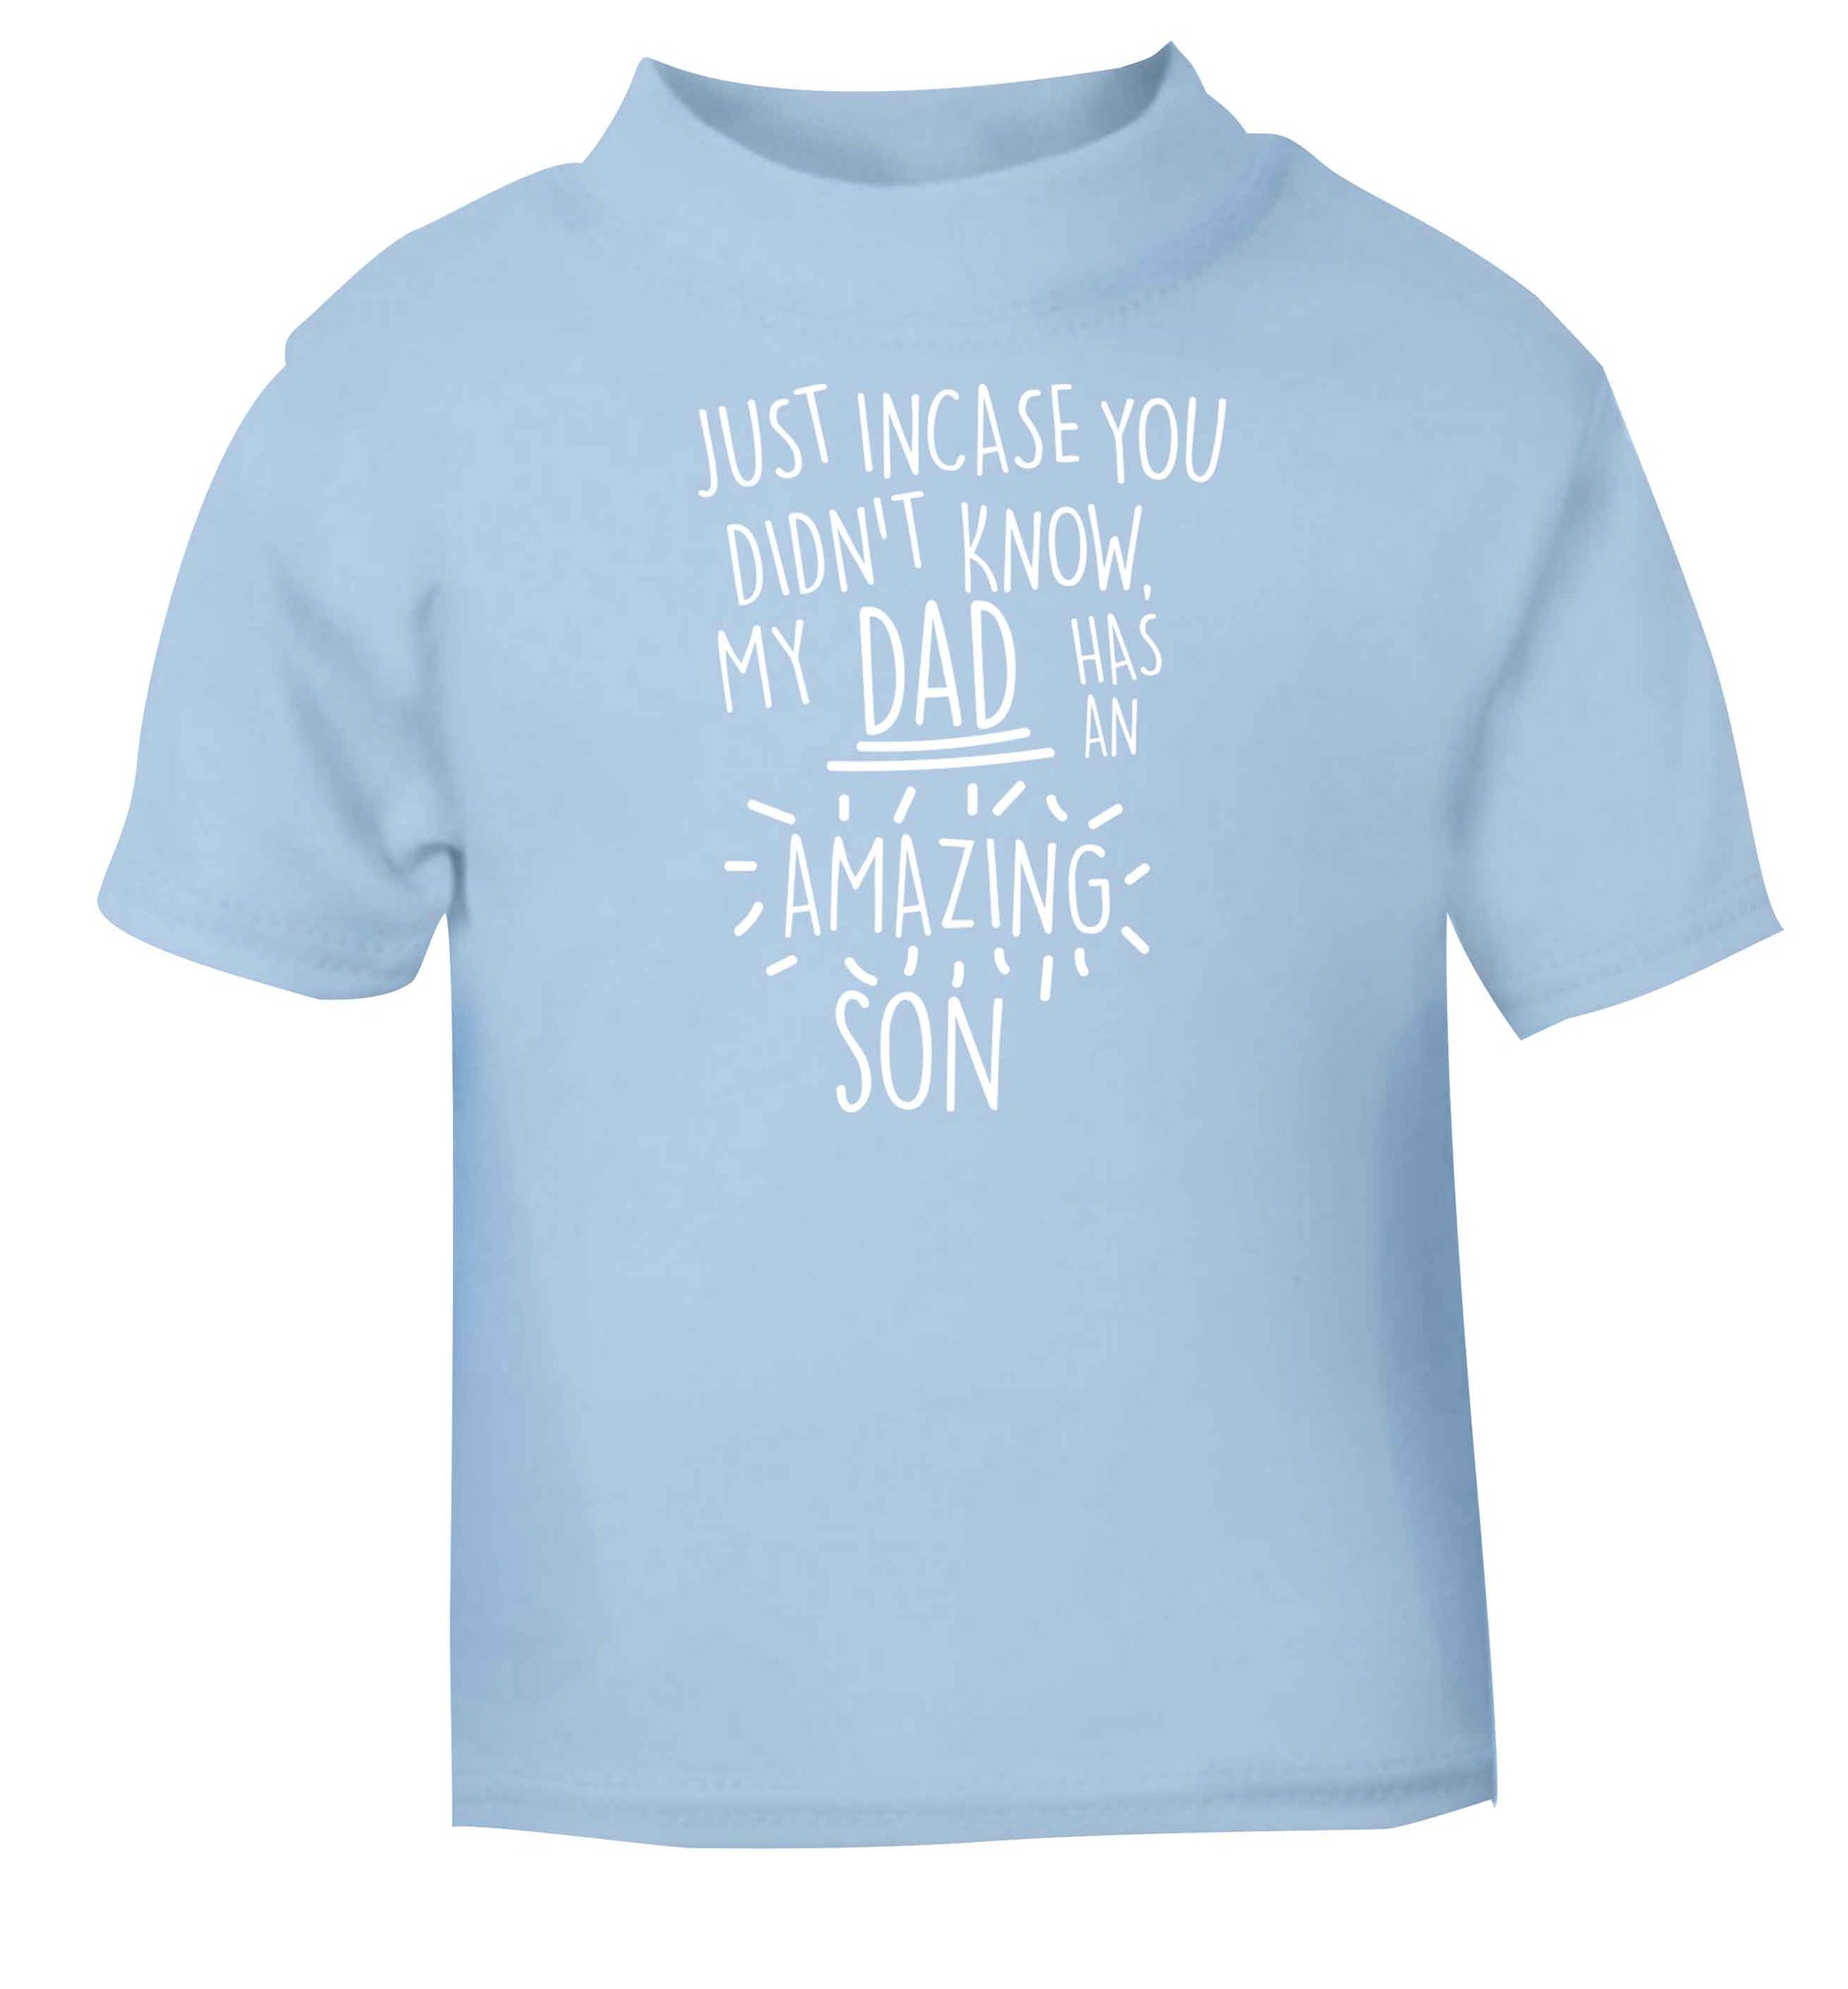 Just incase you didn't know my dad has an amazing son light blue baby toddler Tshirt 2 Years